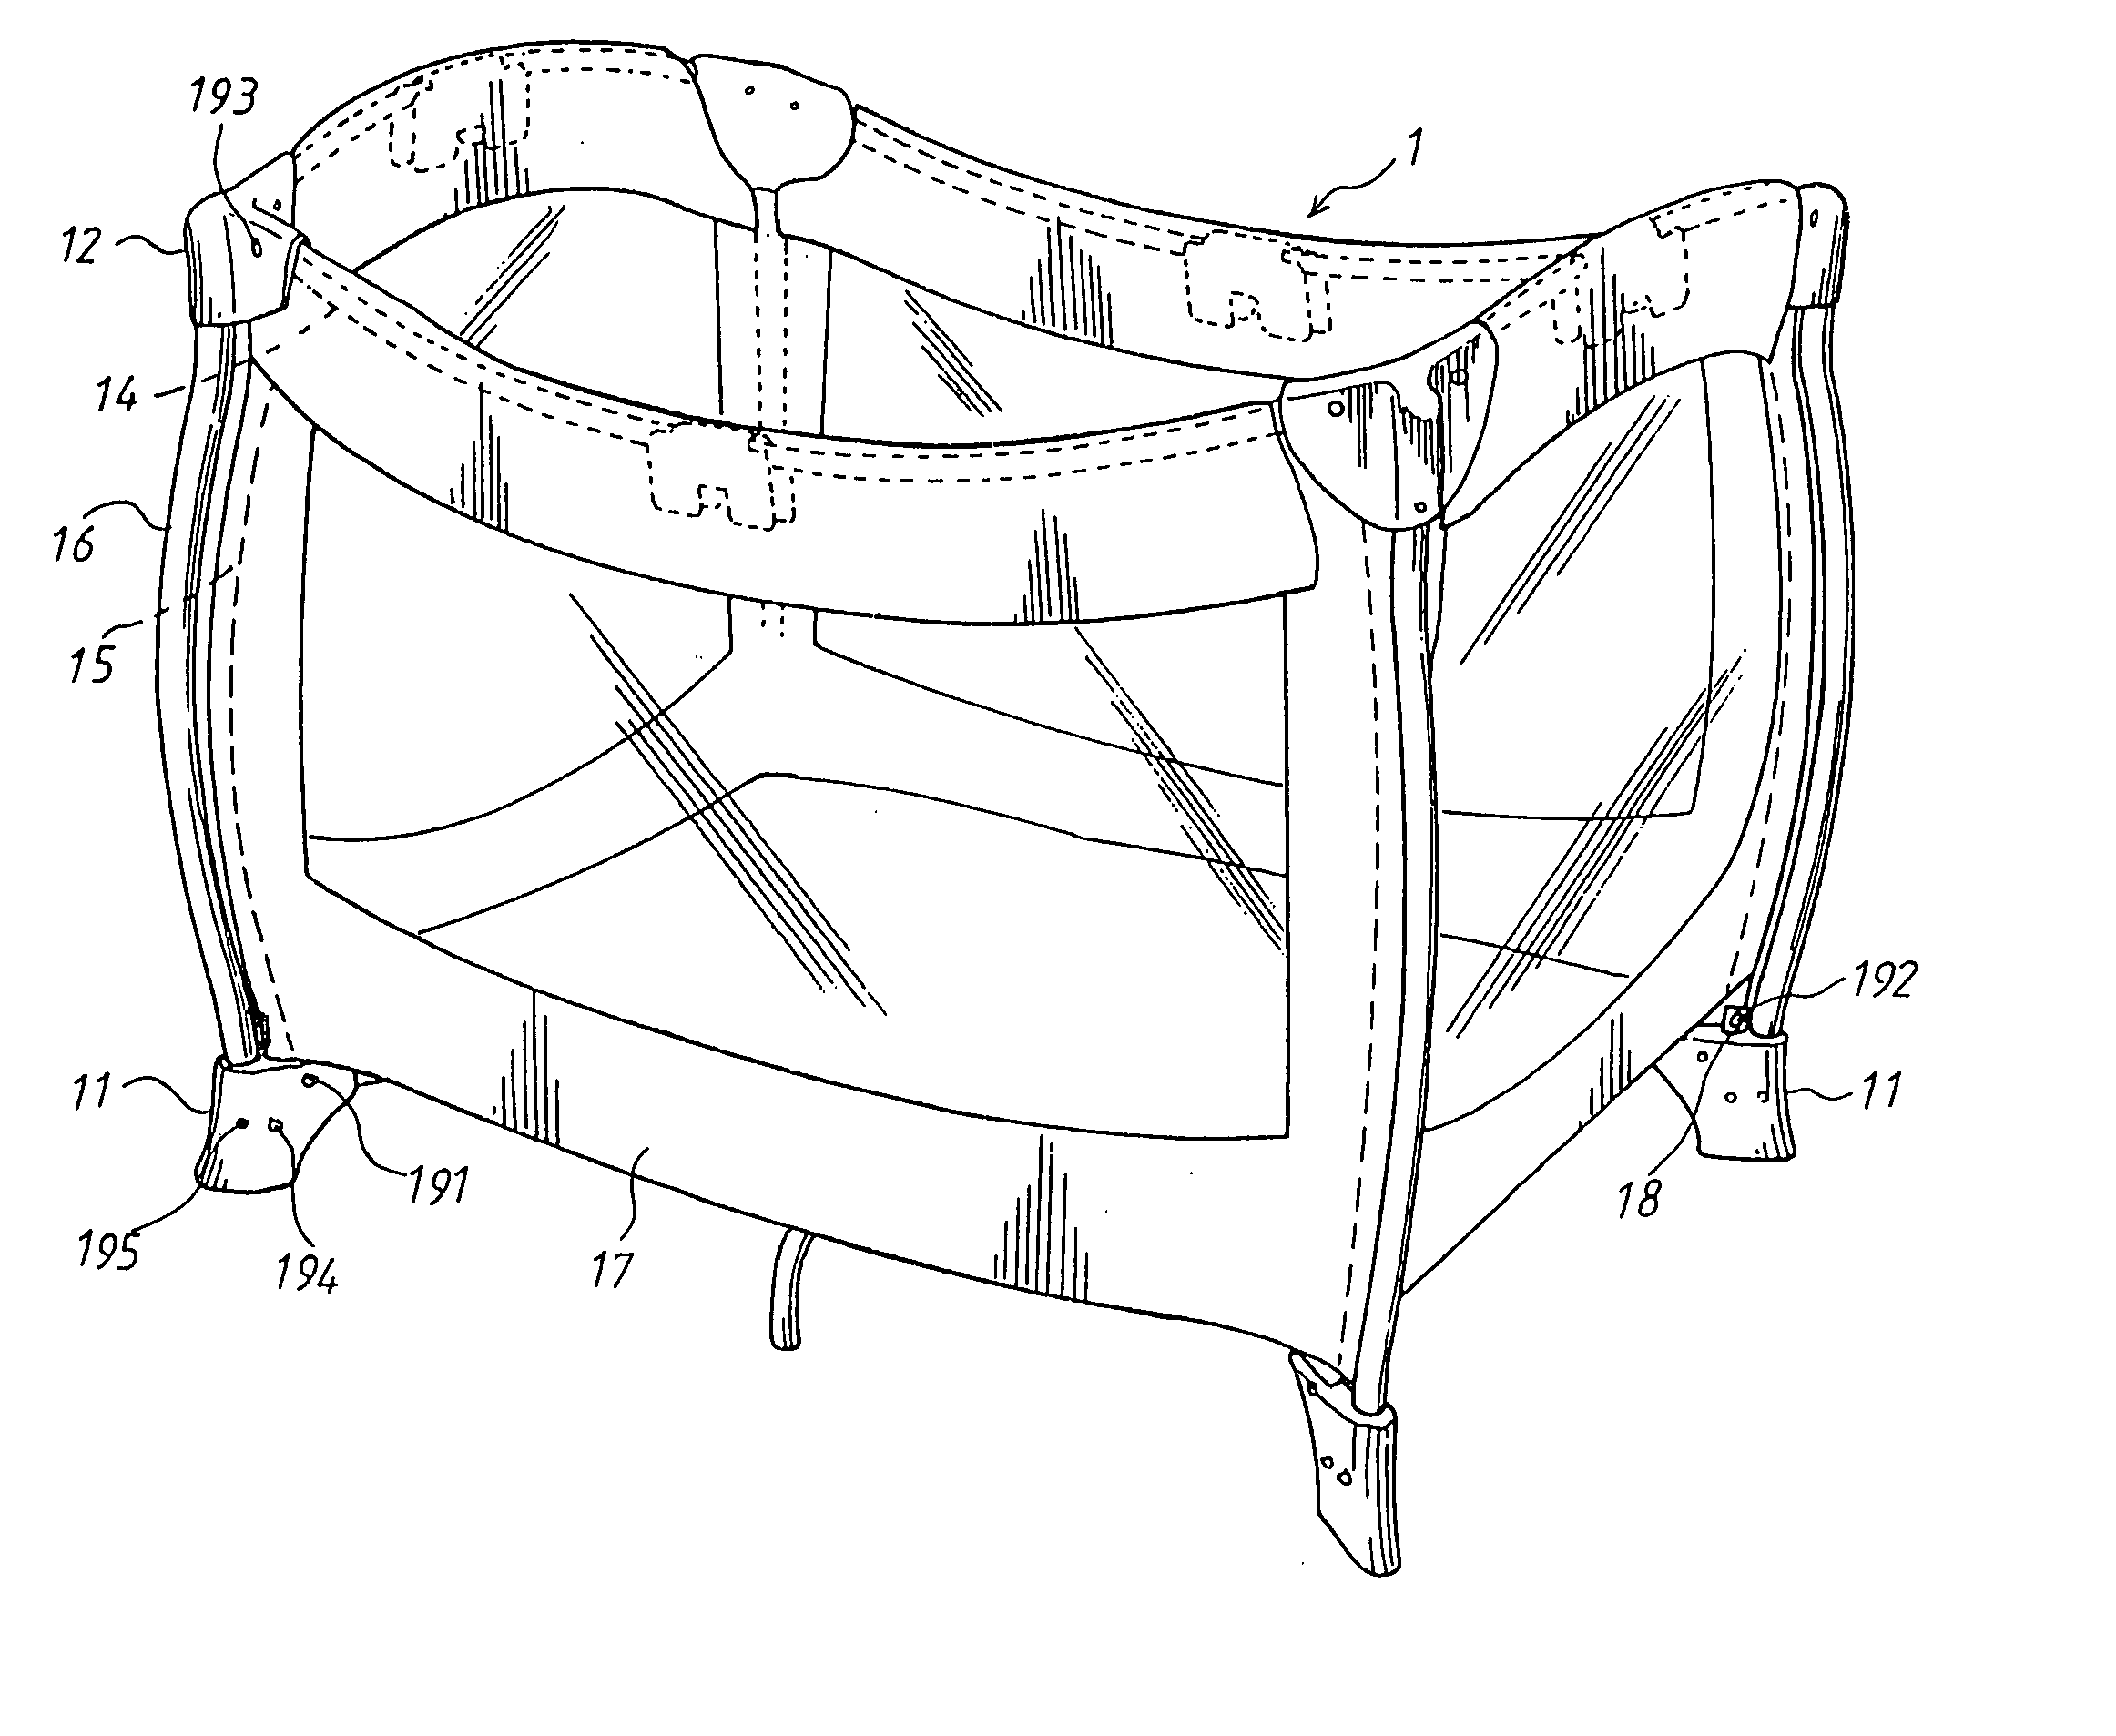 Playpen with double columns at each corner